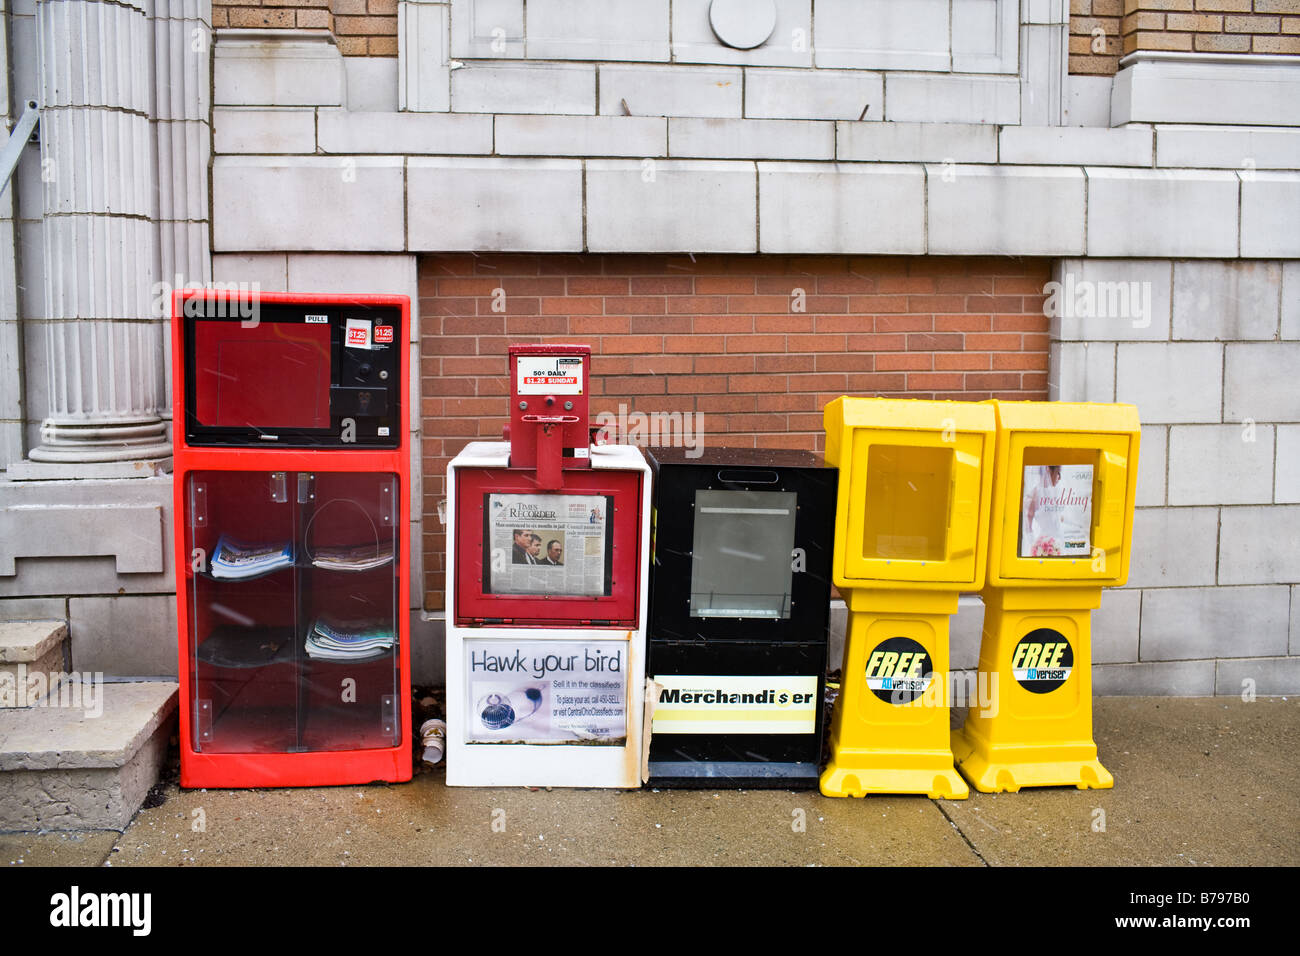 A row of newspaper dispensers on a side walk Stock Photo